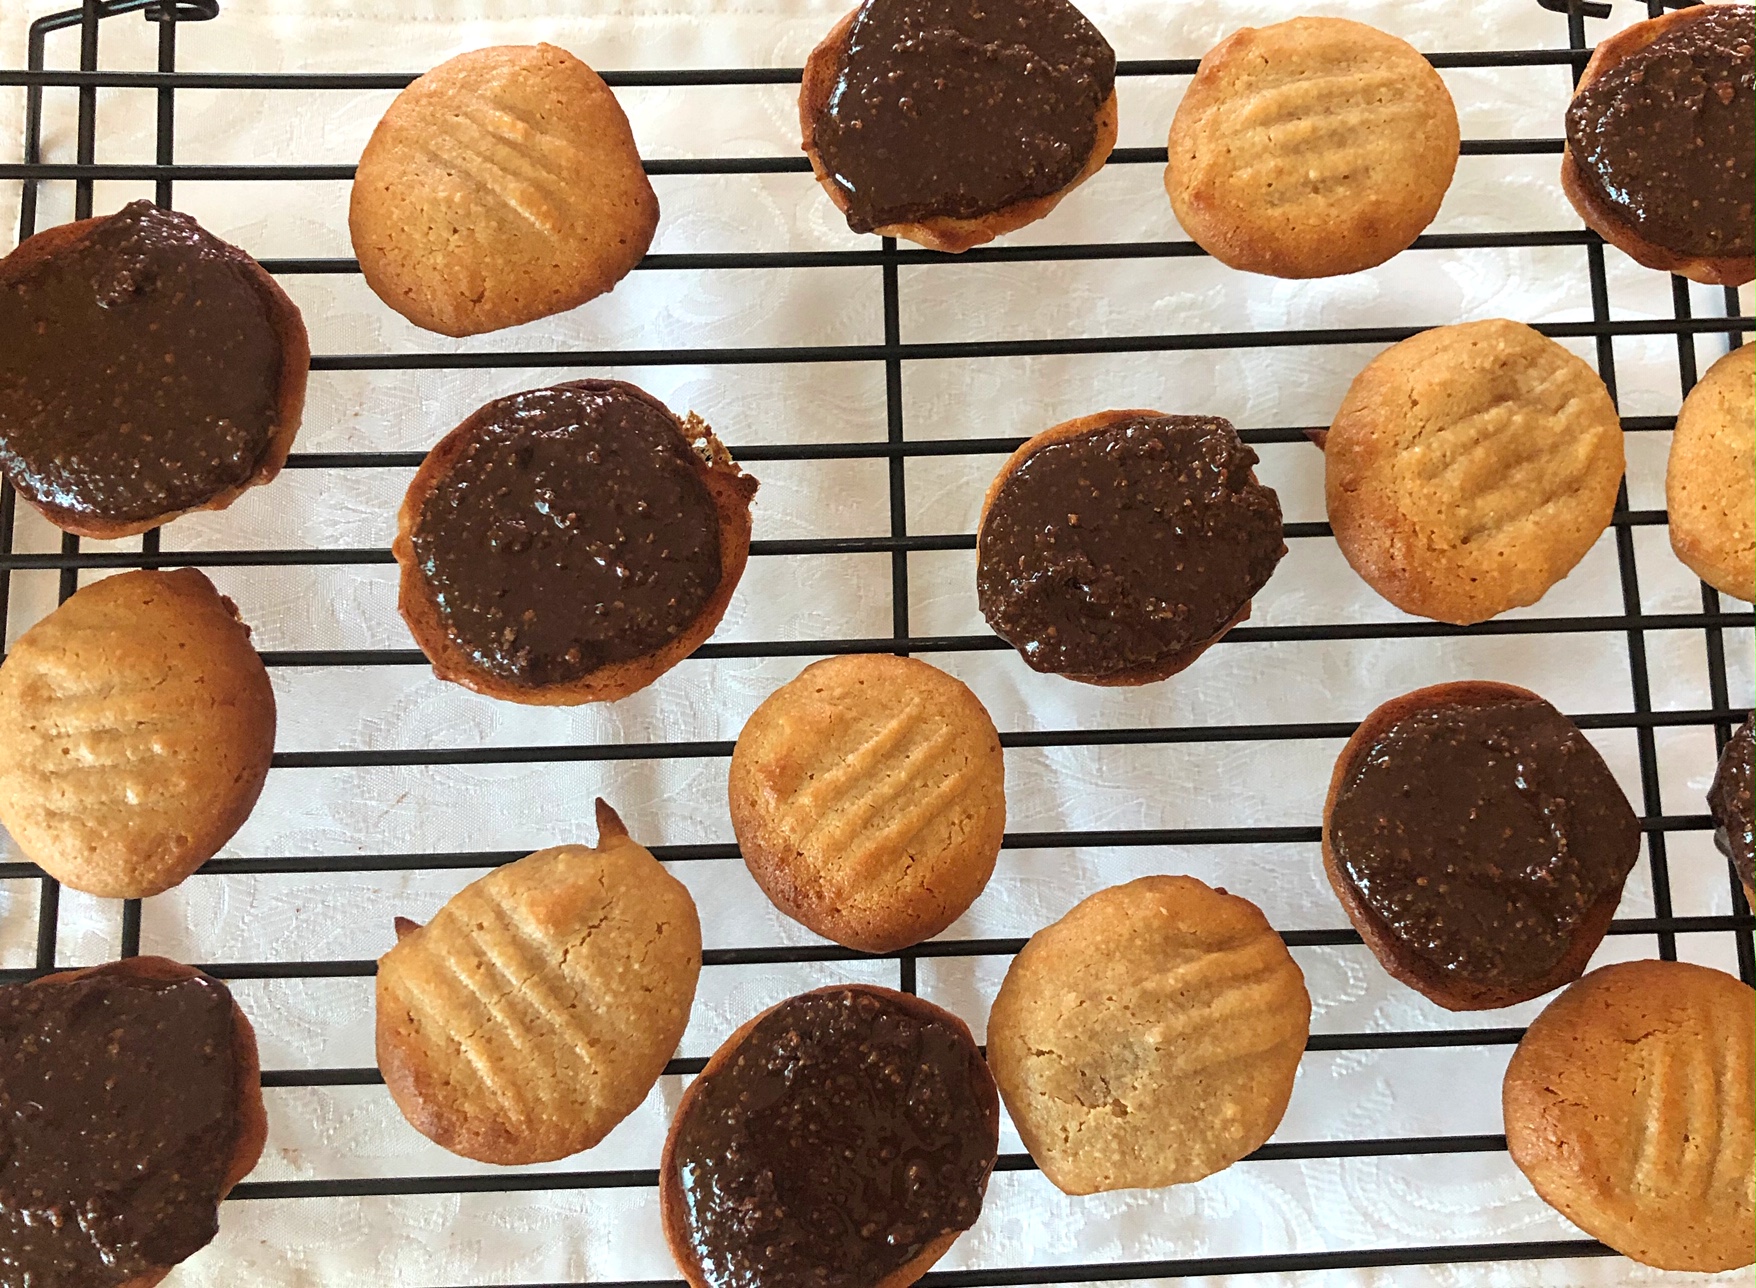 Chocolate Hazlenut Sandwich Cookies; These are the kids' new favourite Cookies to help make...and of course eat! They're absolutely delicious.